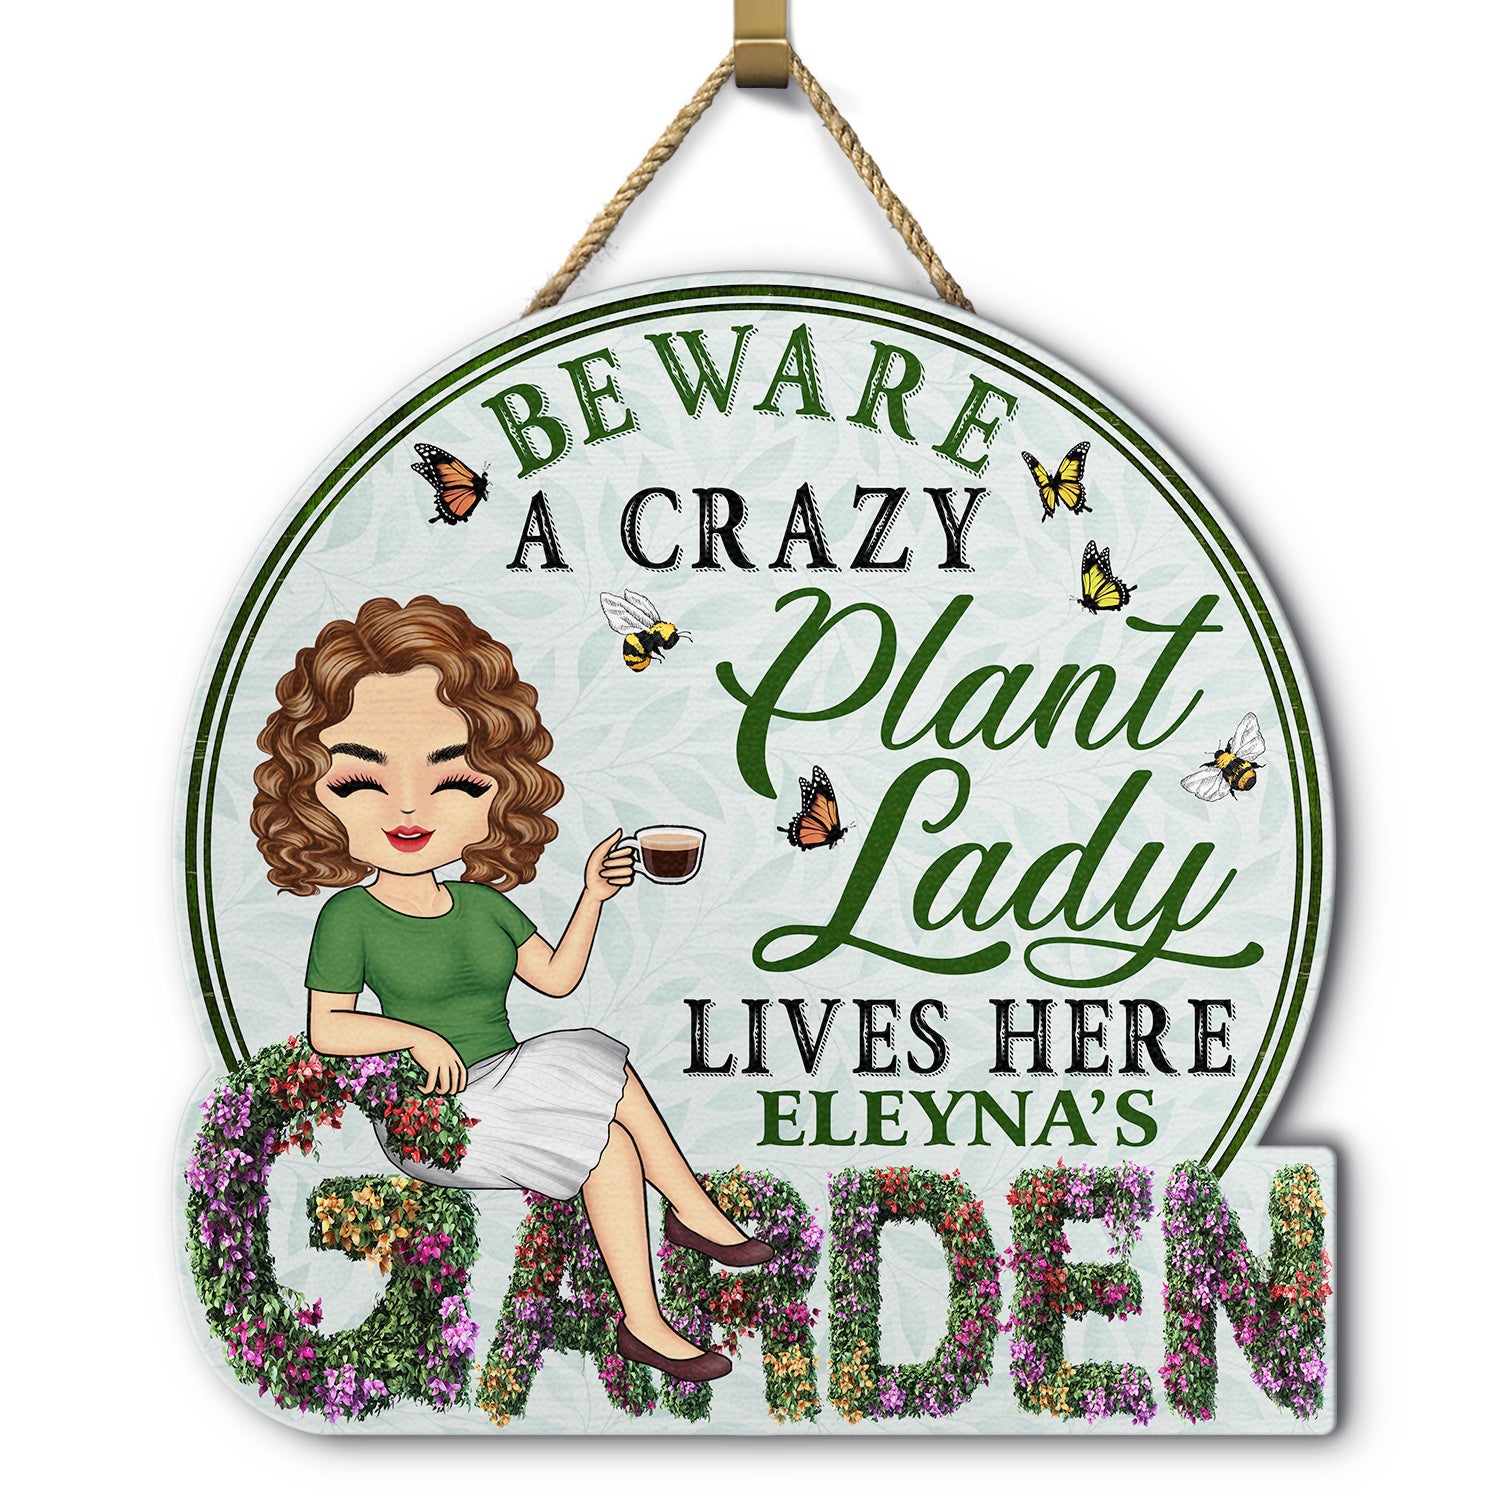 And Into The Garden I Go - Beware A Crazy Plant Lady Lives Here - Birthday, Housewarming Gift For Her, Him, Gardener, Outdoor Decor - Personalized Custom Shaped Wood Sign